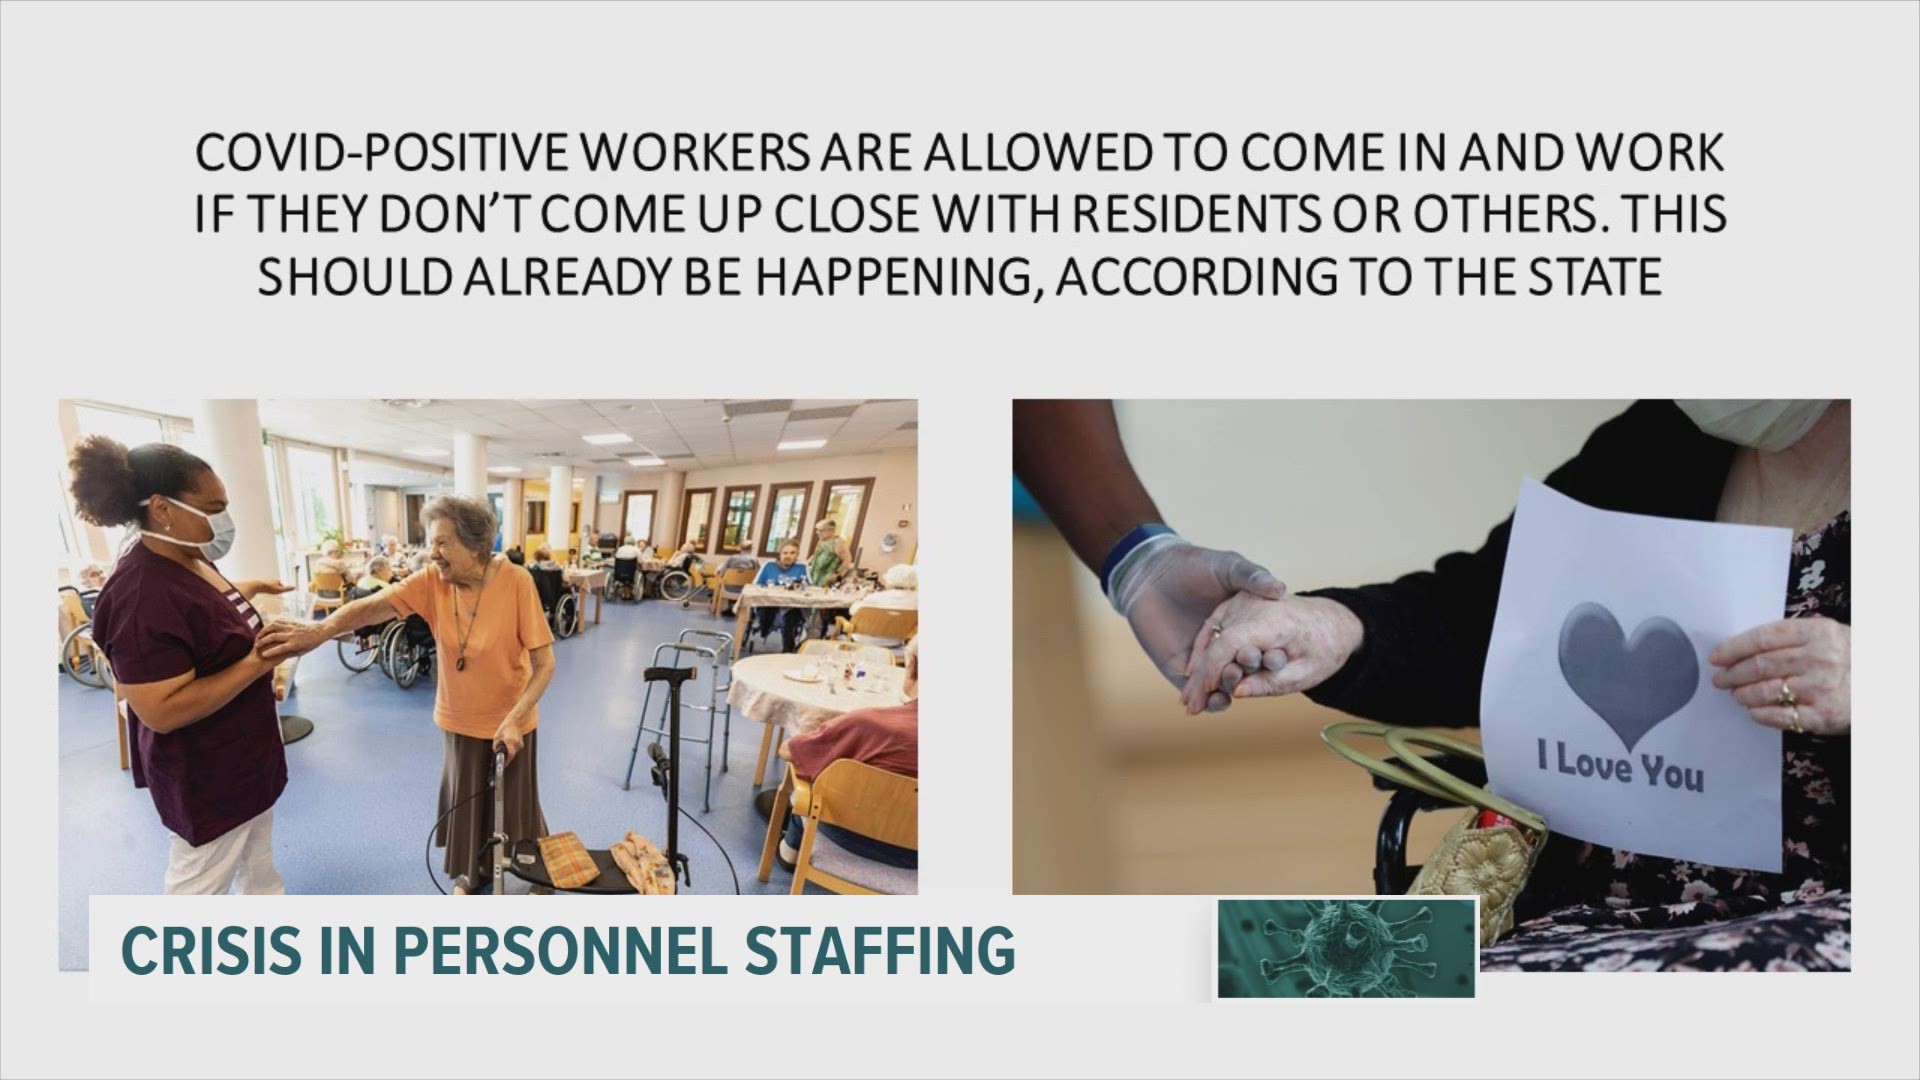 Workers who have tested positive are allowed to come in and perform job duties that don't get them up close with residents or others.